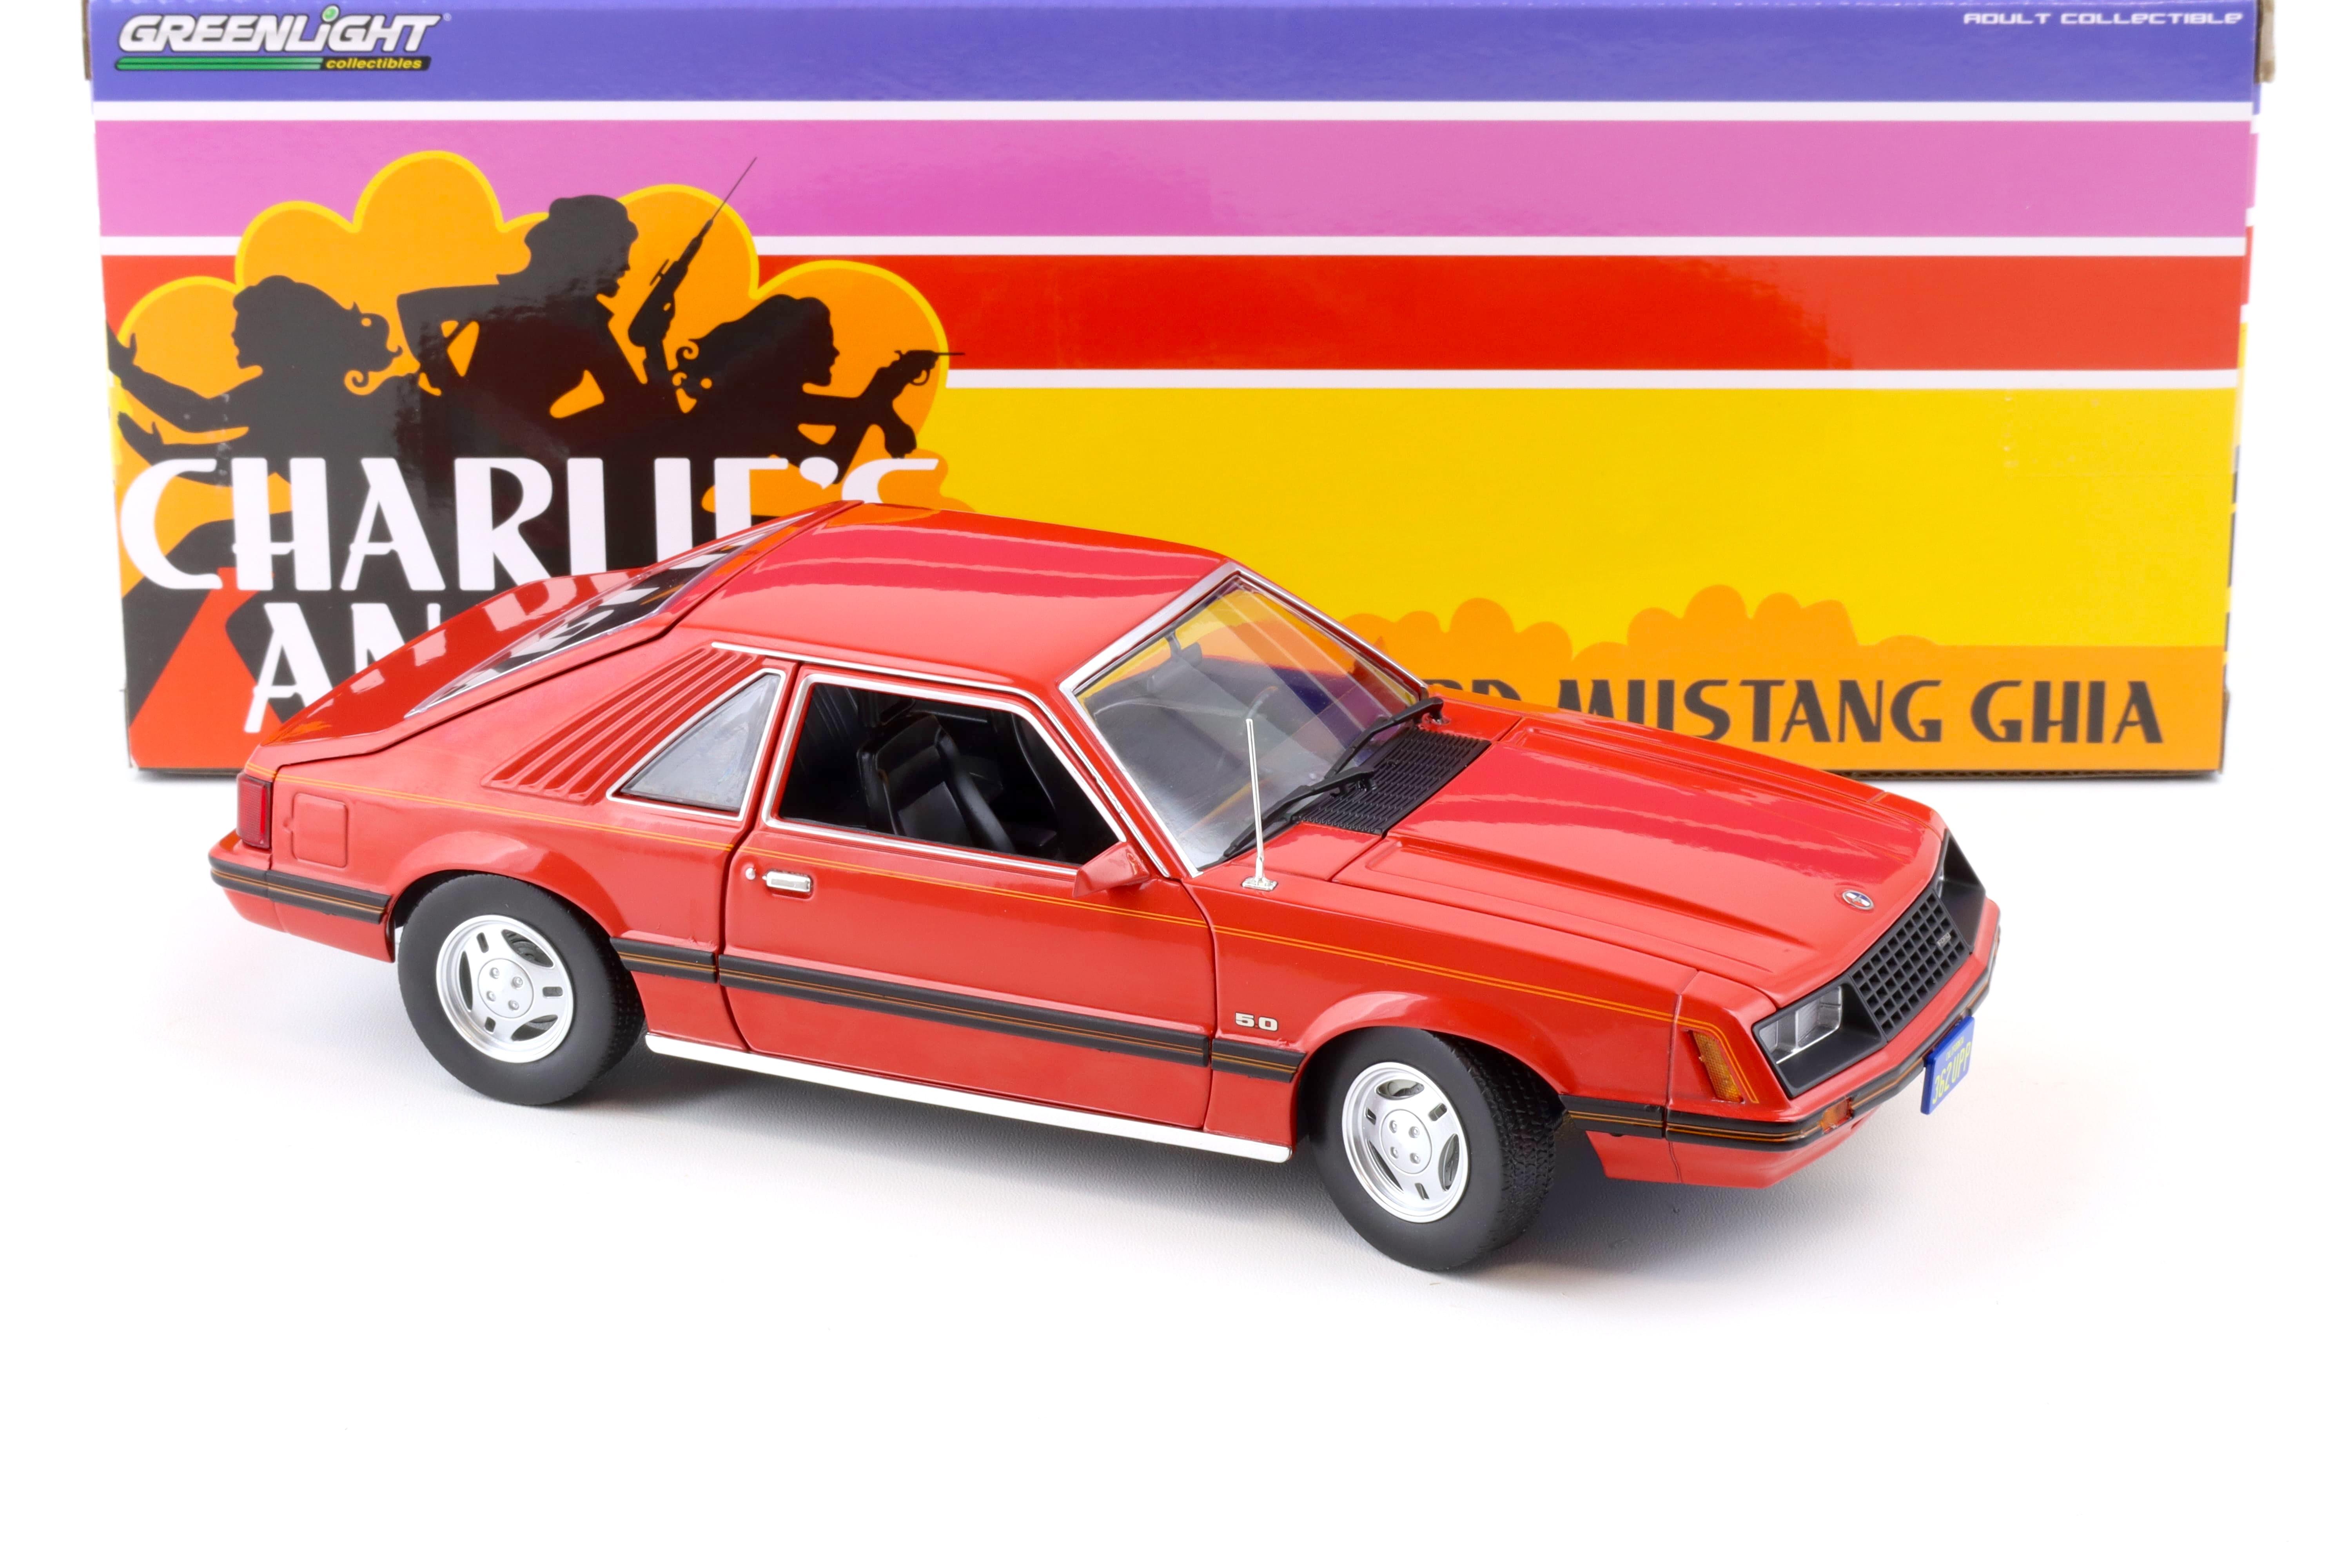 1:18 Greenlight 1979 Ford Mustang Ghia Coupe medium red/ black stripe Charlie's Angels